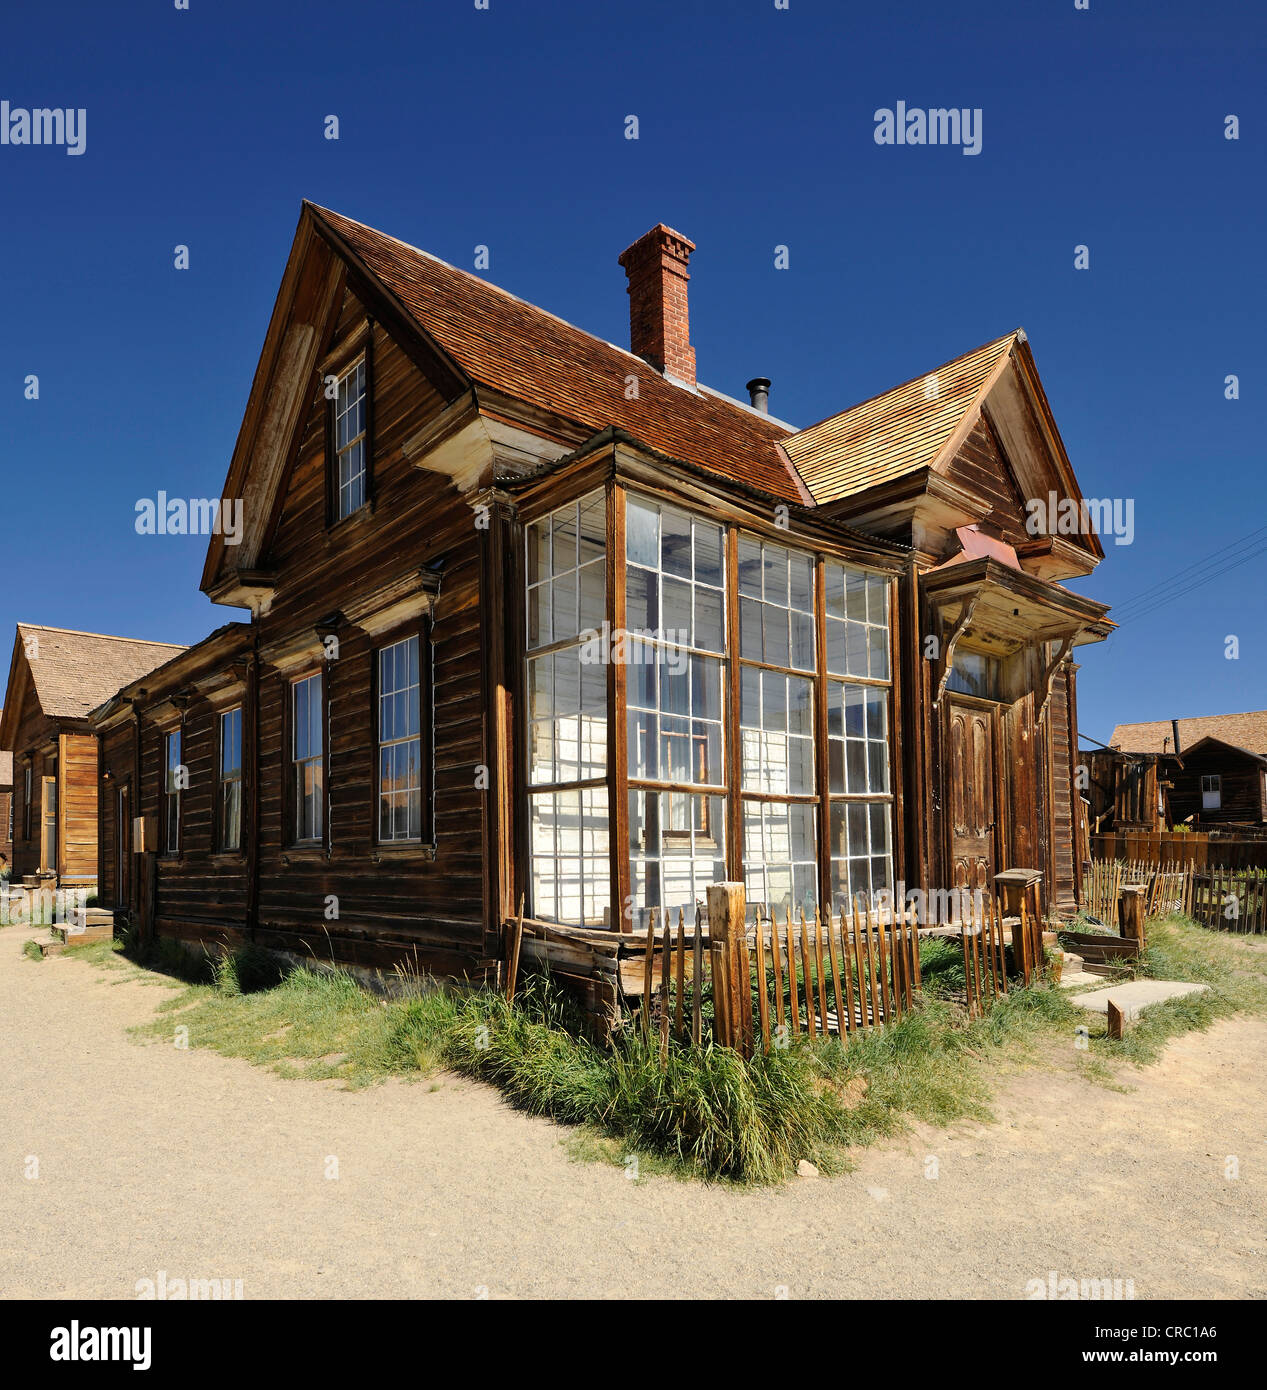 Residence of James Stuart Cain, a wealthy citizen from the ghost town of Bodie, a former gold mining town Stock Photo